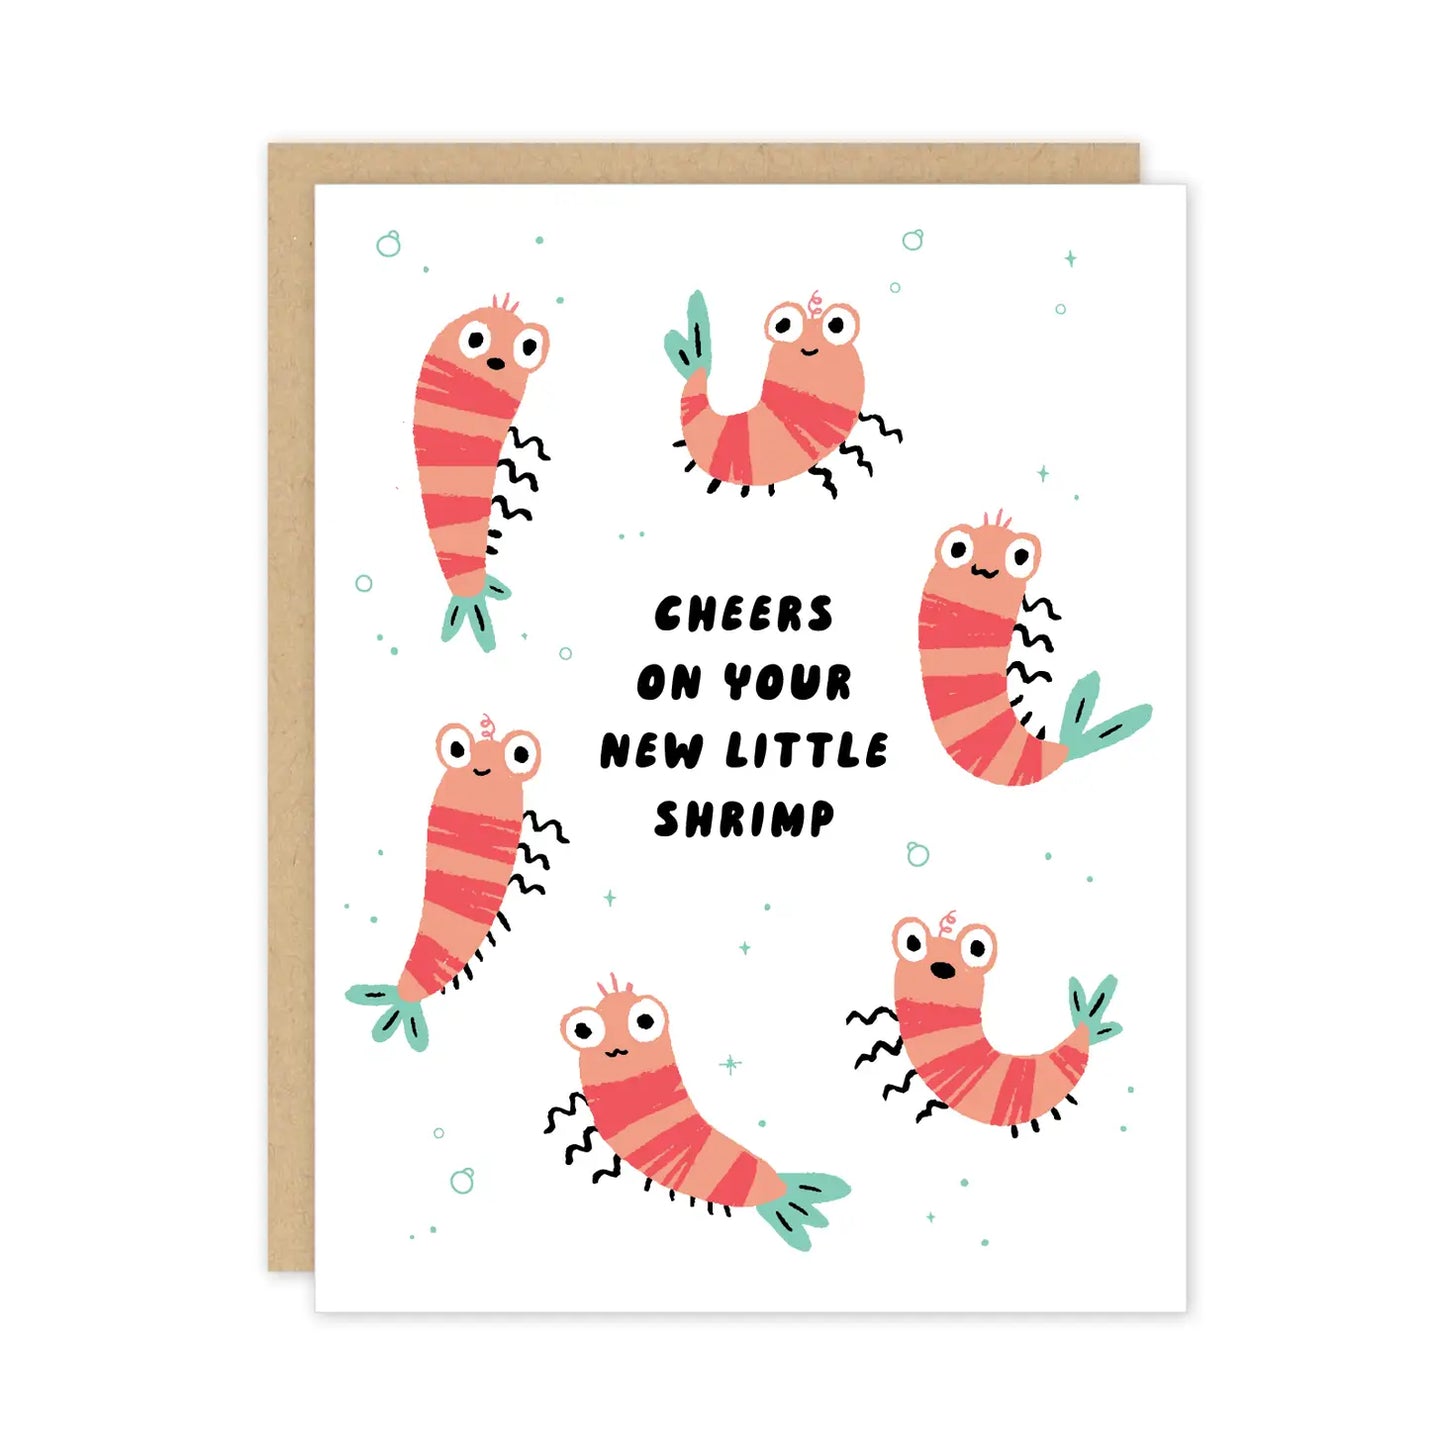 Newborn baby greeting card -- it reads "Cheers on your new little shrimp" 